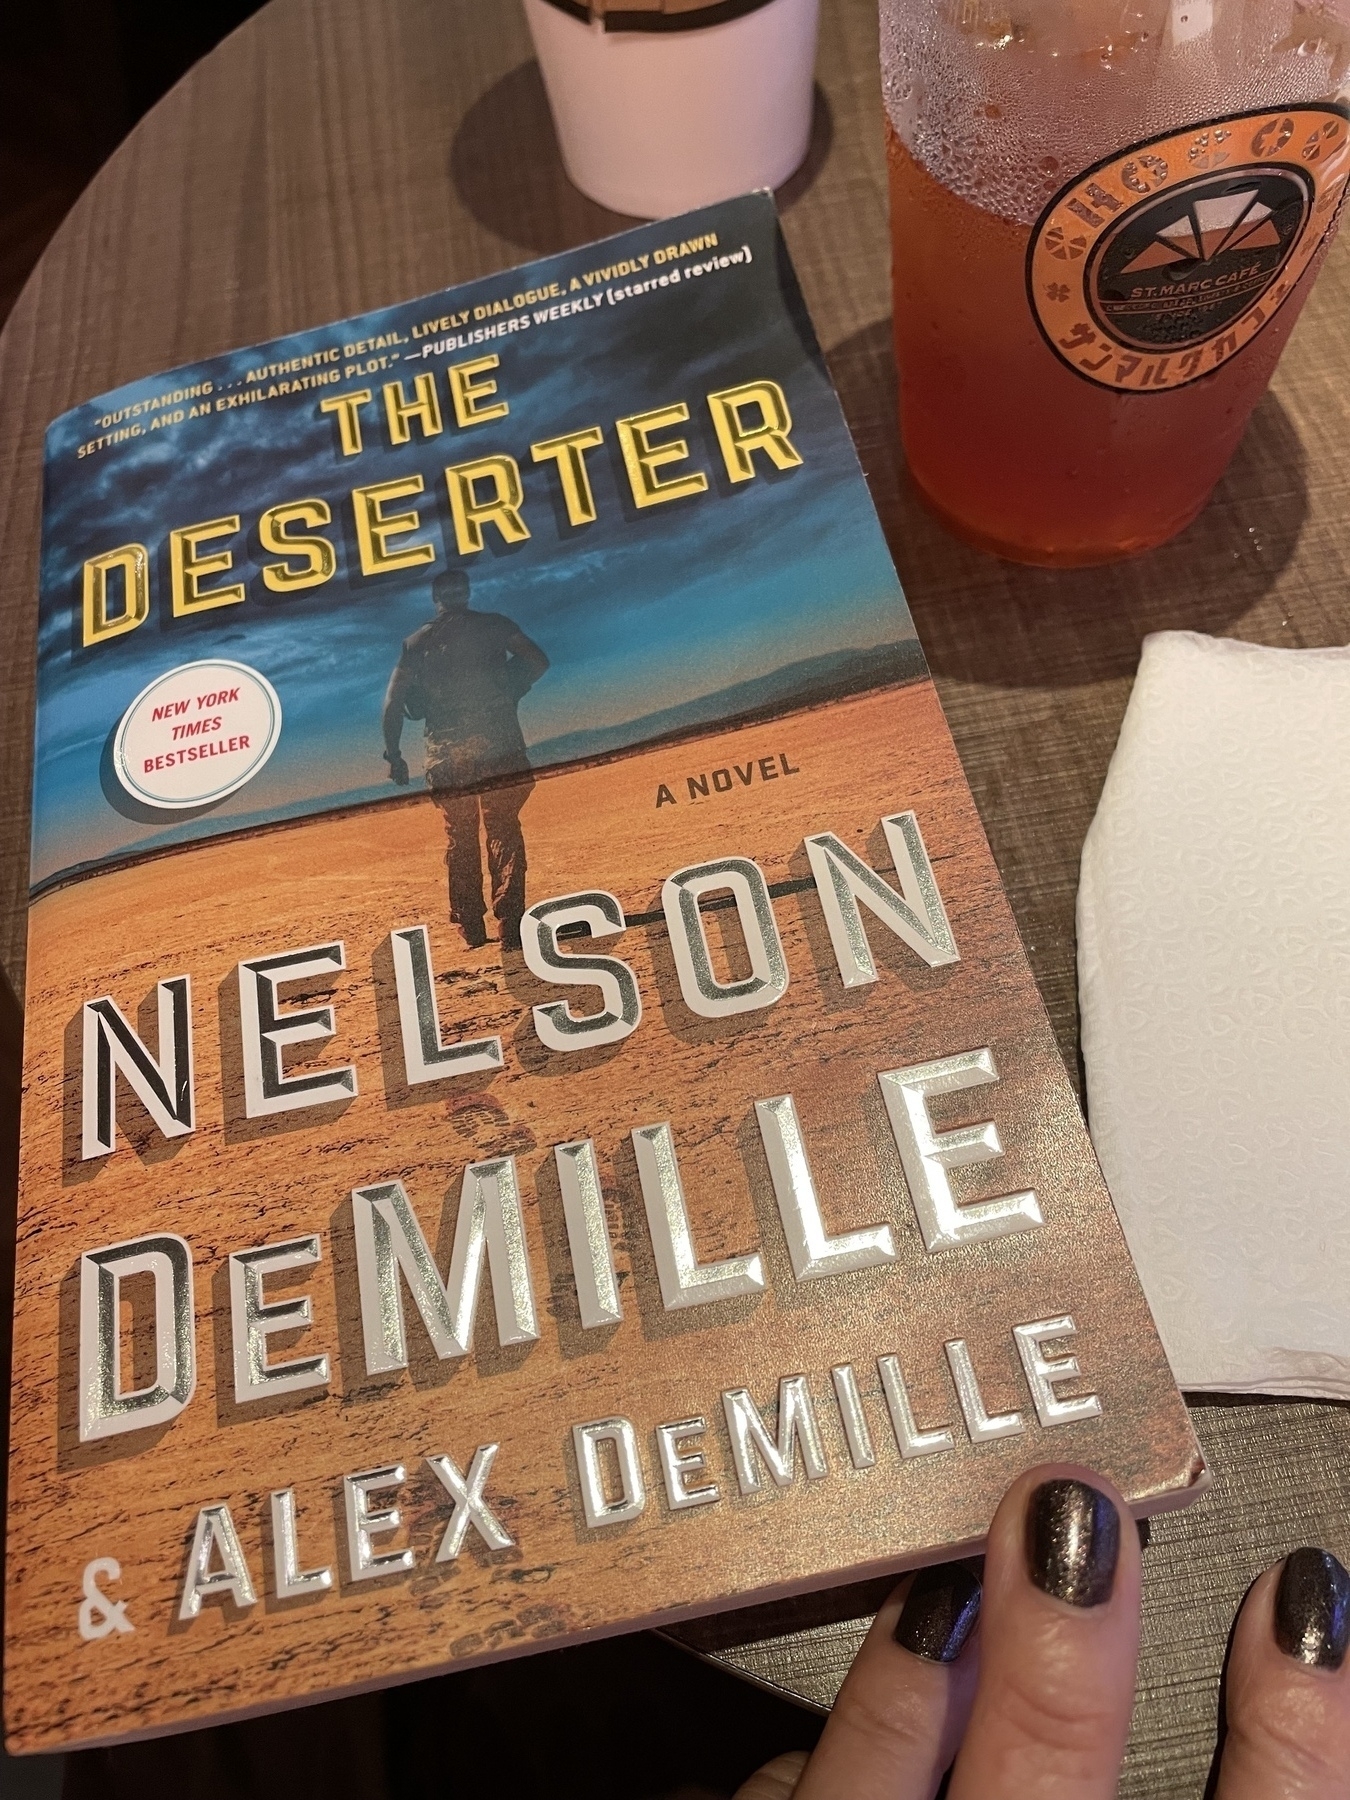 A softcover copy of the novel The Deserter by authors Nelson and (son) Alex DeMille